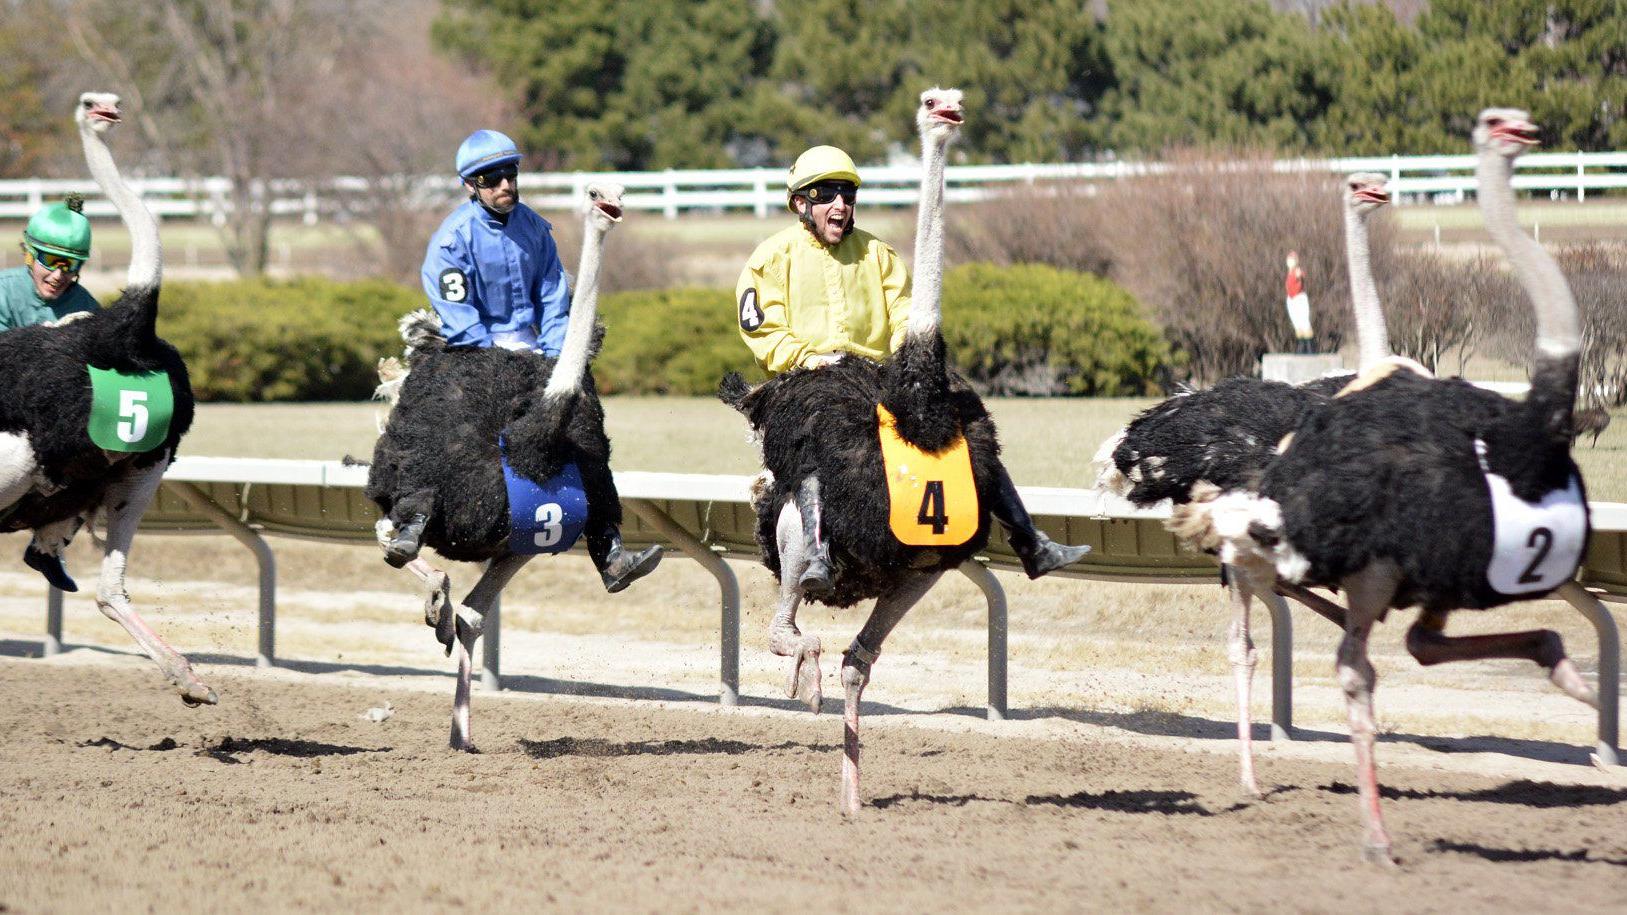 Some 'controversy' surrounds finish of ostrich race at Fonner | Fonner Park | theindependent.com